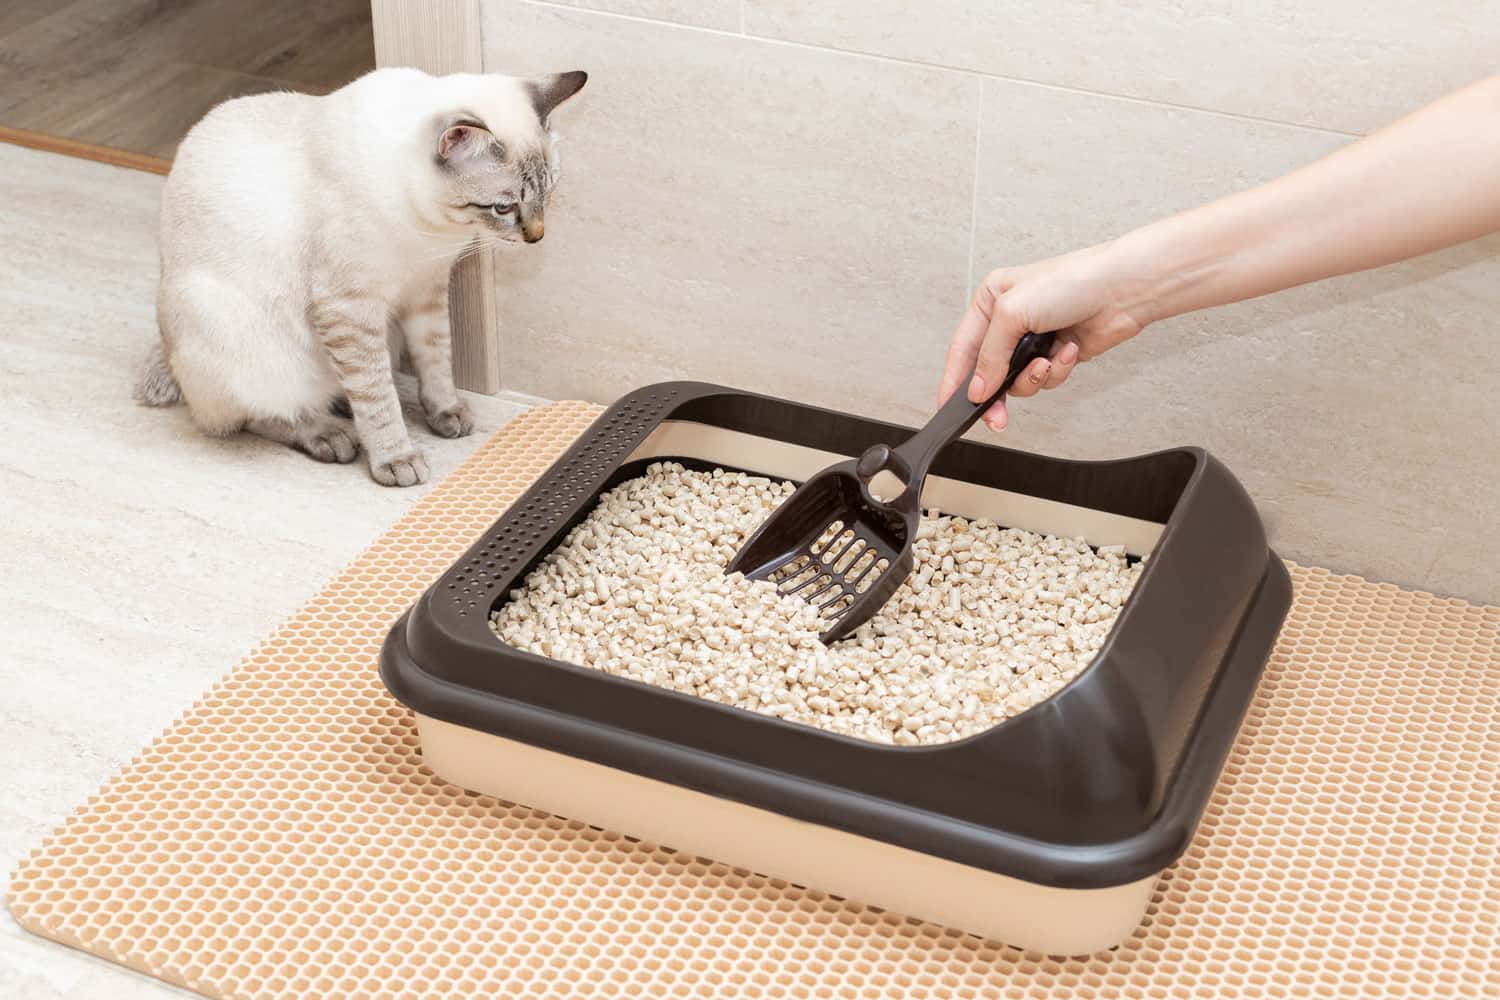 female hand cleaning cat litter box with shovel at home. Cleanliness and hygiene concept
